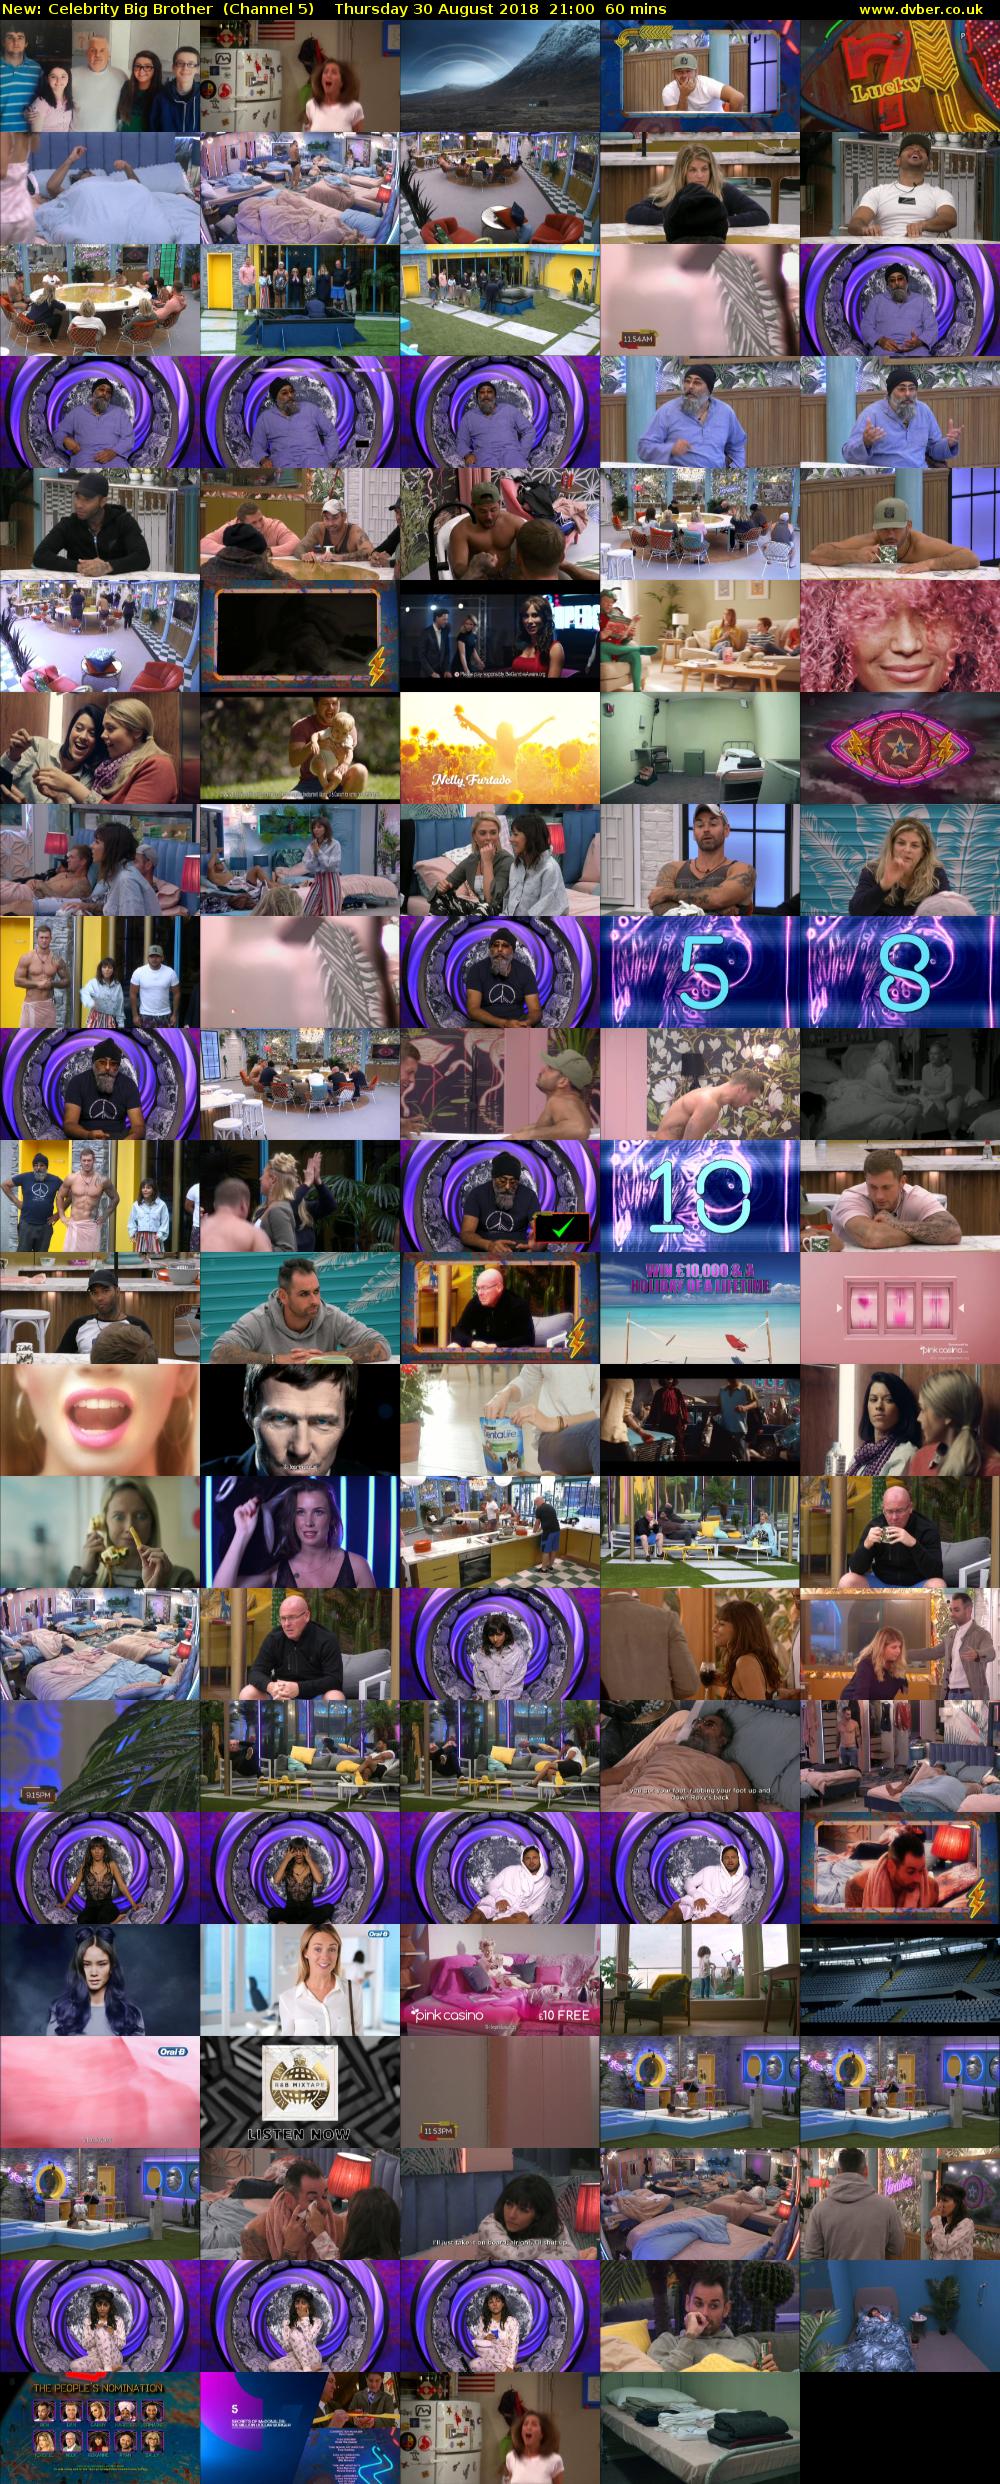 Celebrity Big Brother (Channel 5) Thursday 30 August 2018 21:00 - 22:00